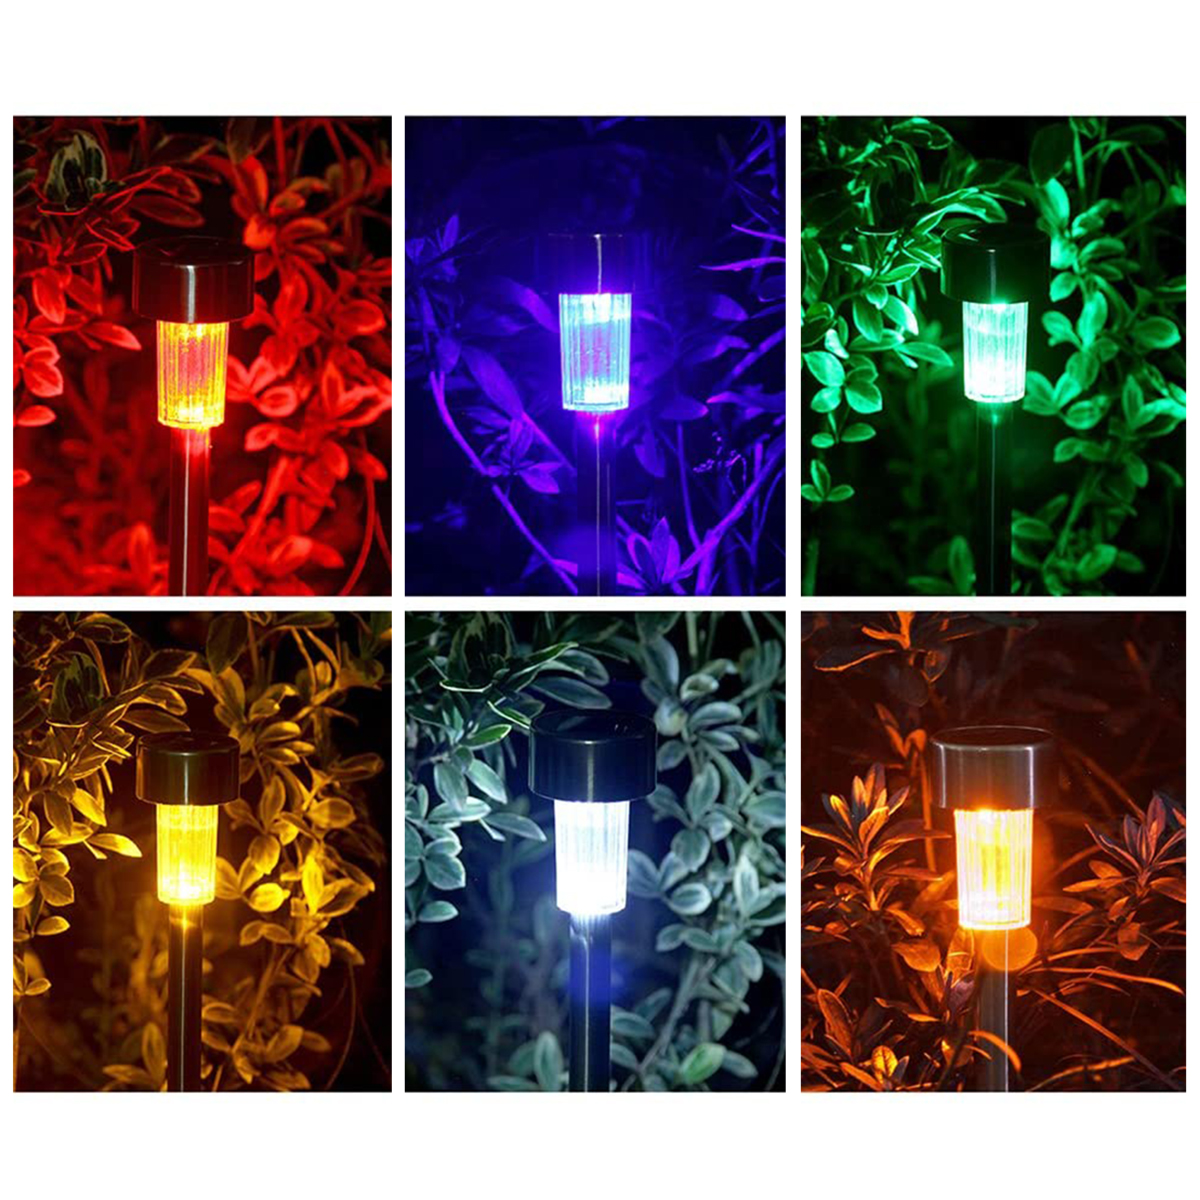 GIGALUMI Solar Lights, Outdoor LED Path Light Stainless Steel-12 Pack (Multi-Color) - image 4 of 6